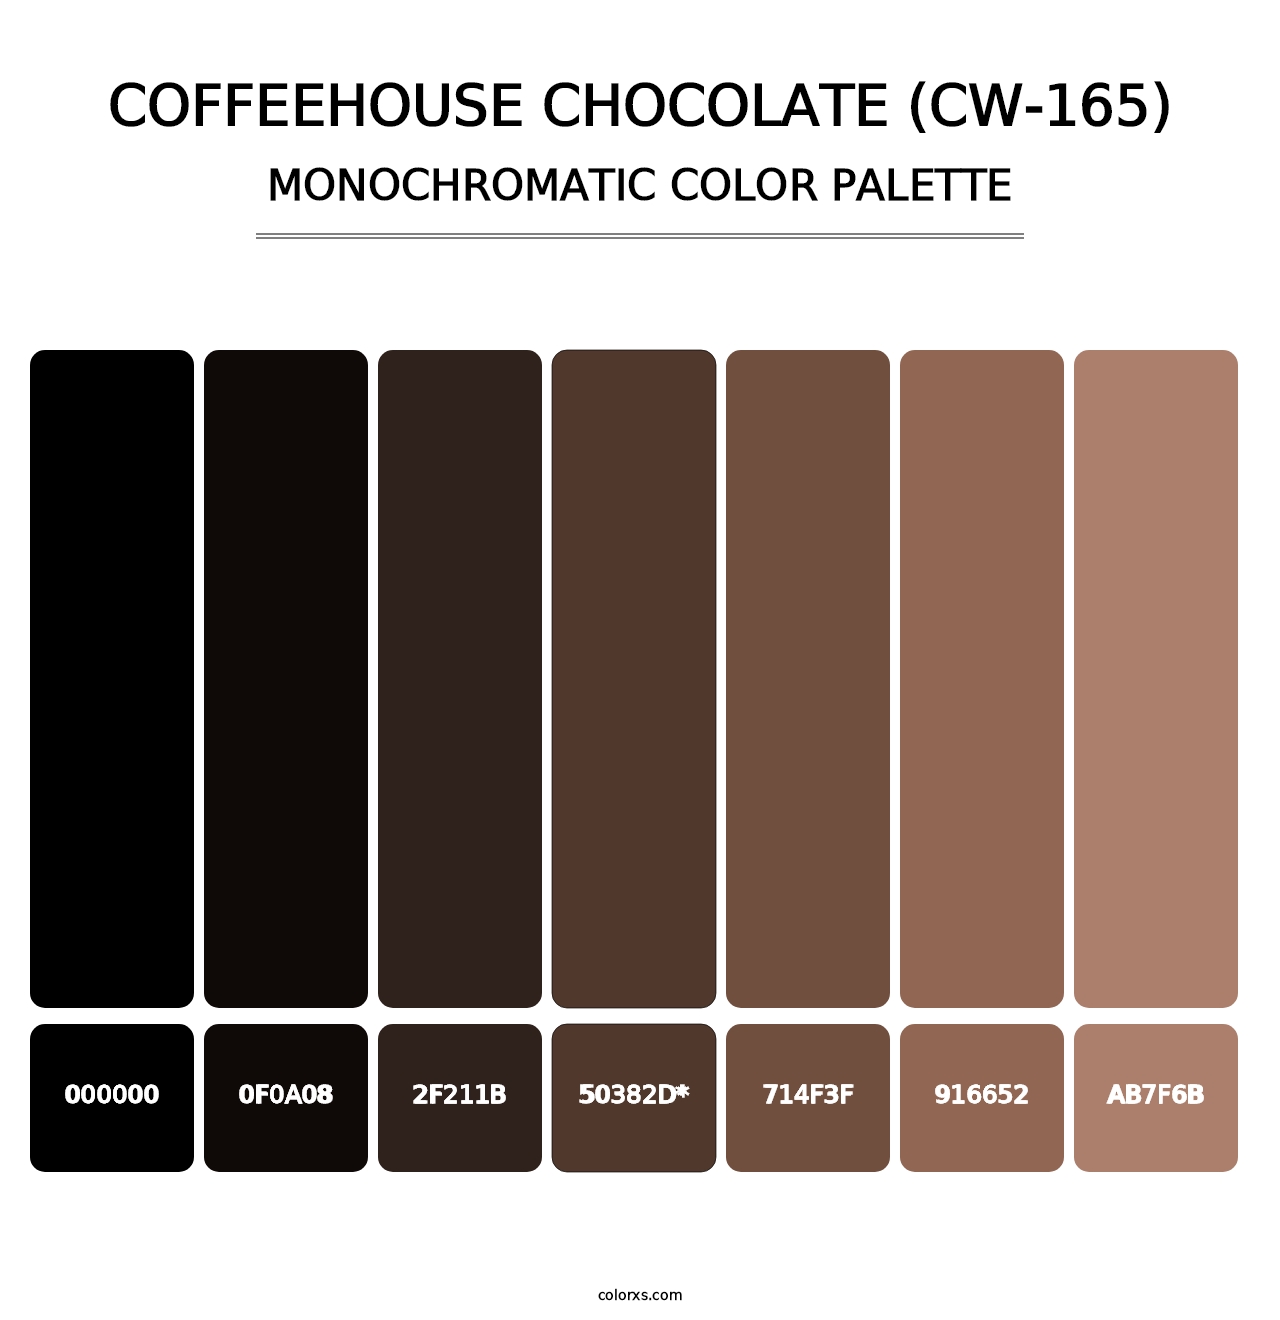 Coffeehouse Chocolate (CW-165) - Monochromatic Color Palette